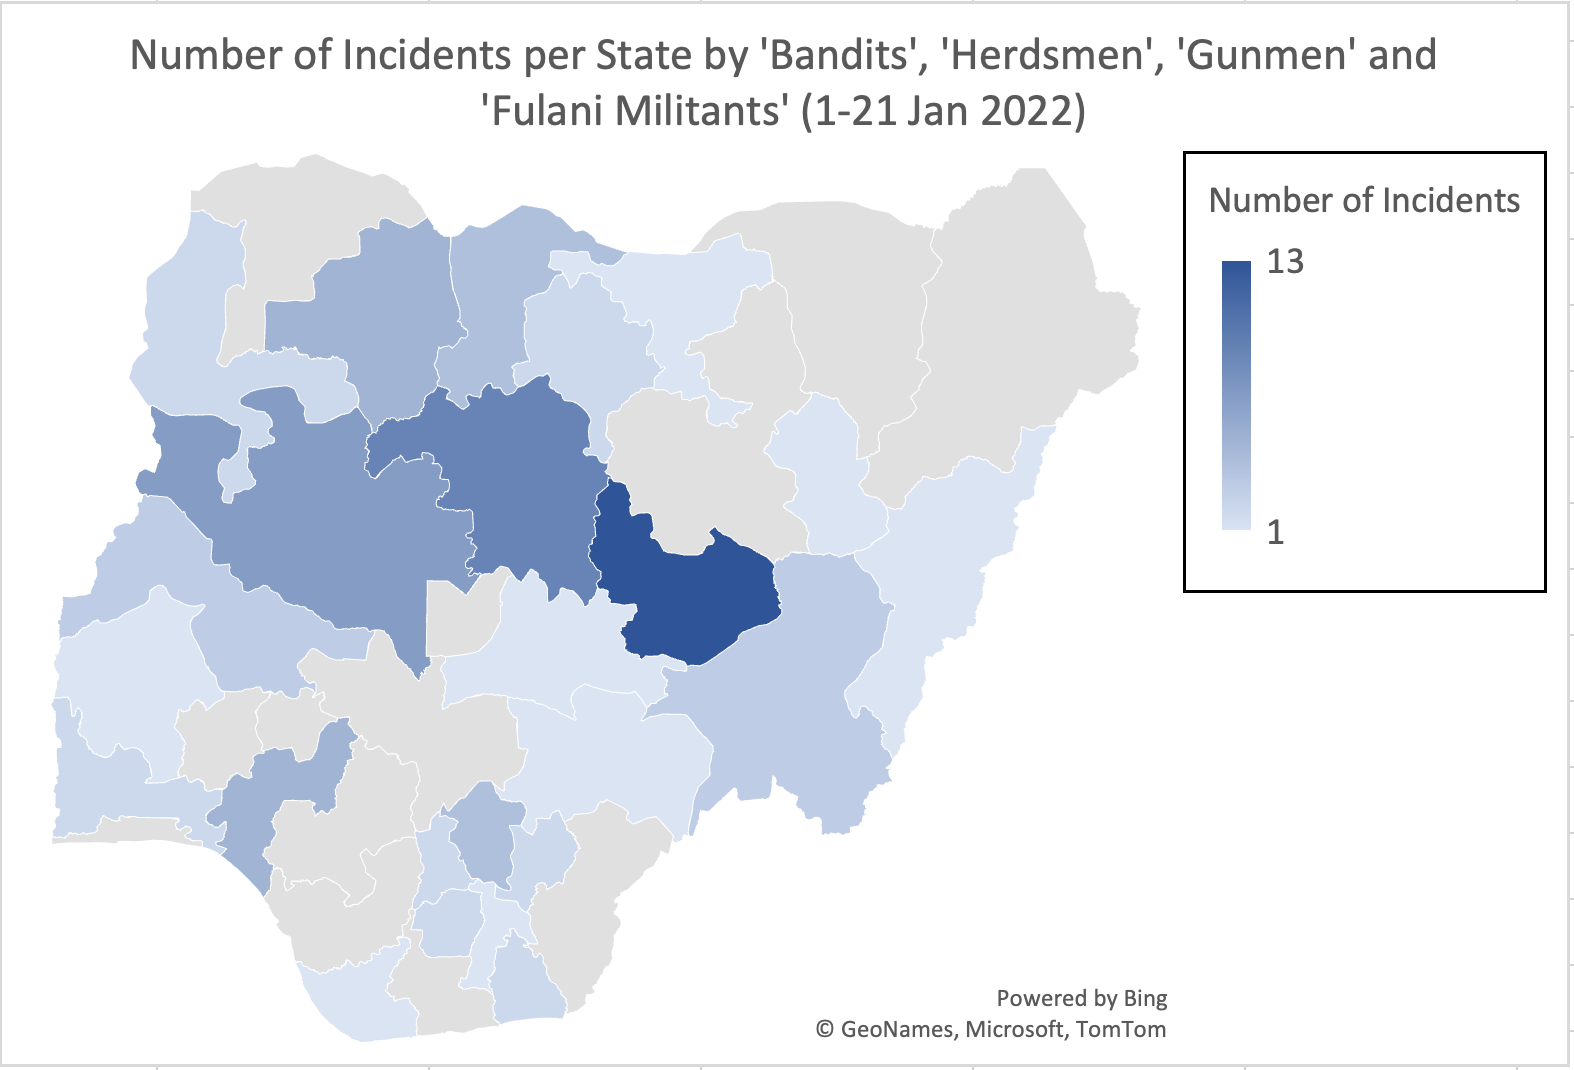 Violence in Nigeria: At least 615 killed in first three weeks of 2022